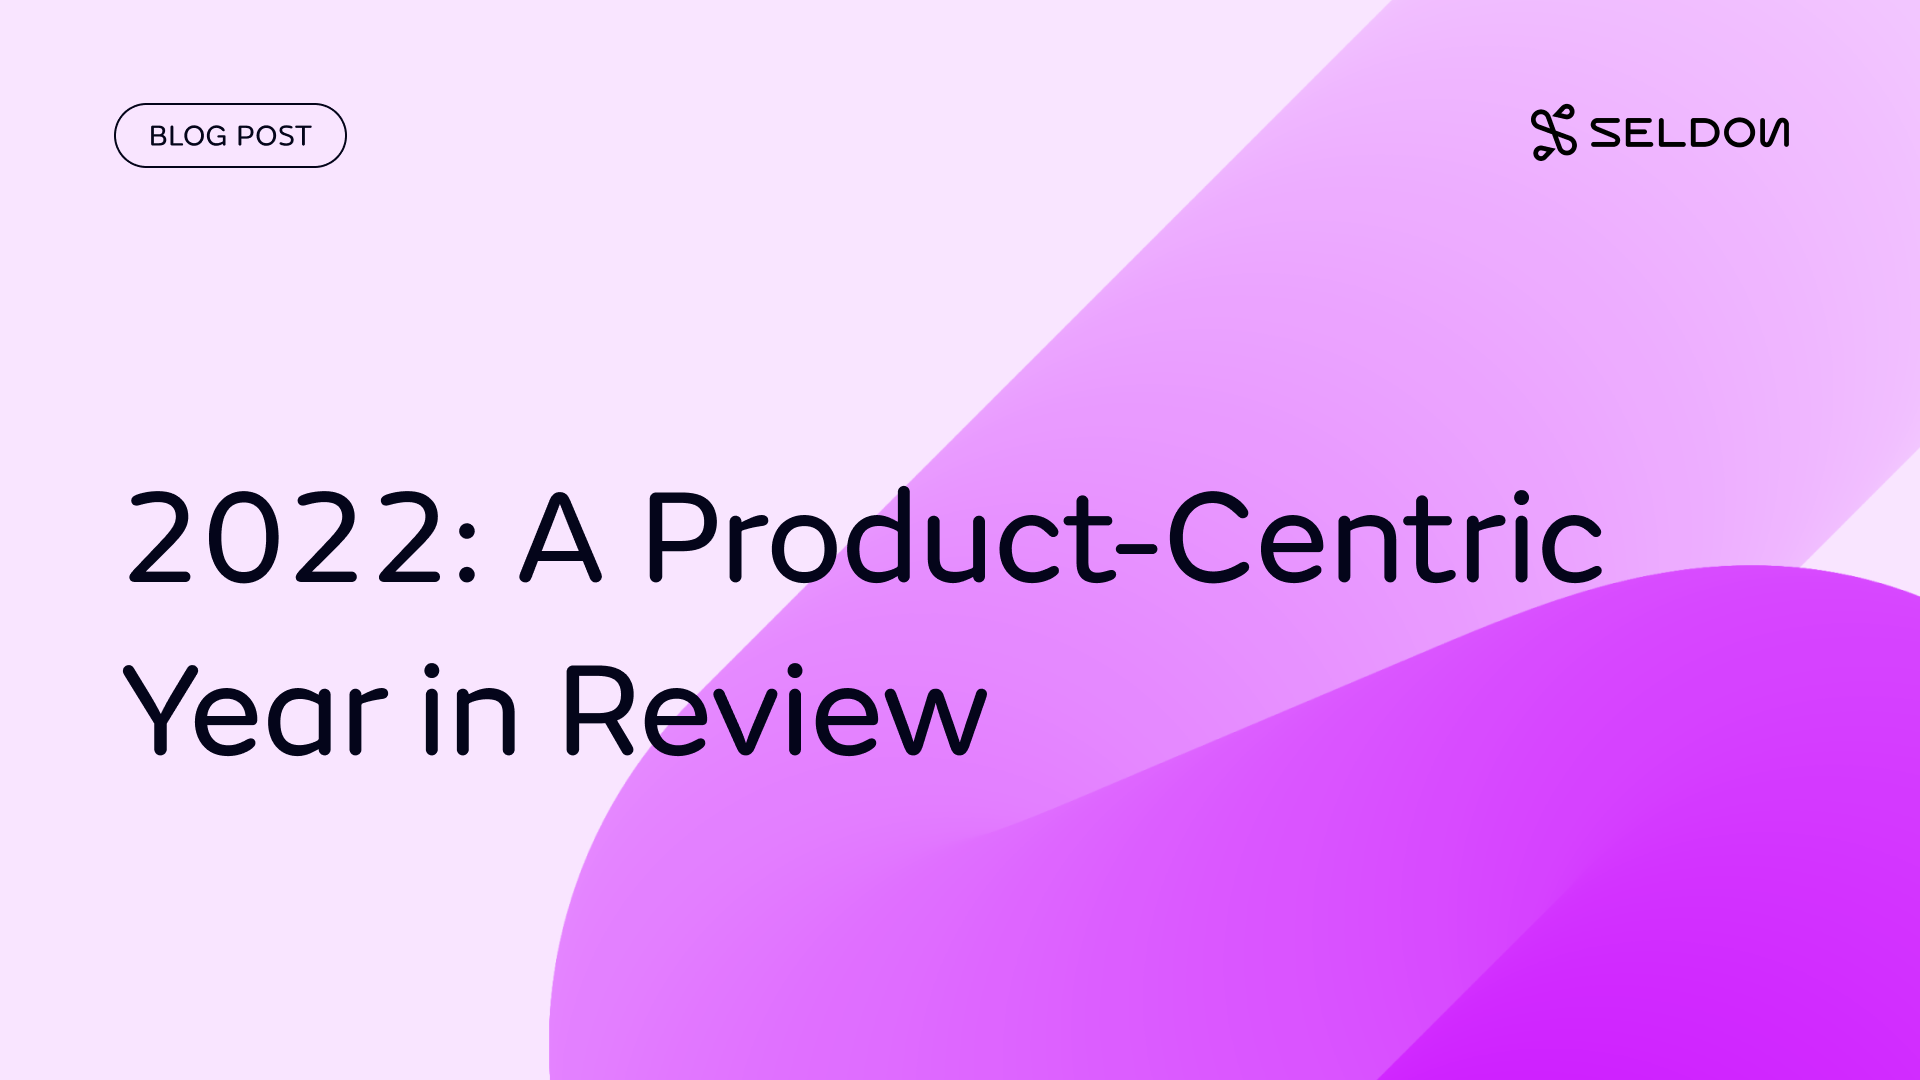 A Product-Centric Year in Review at Seldon